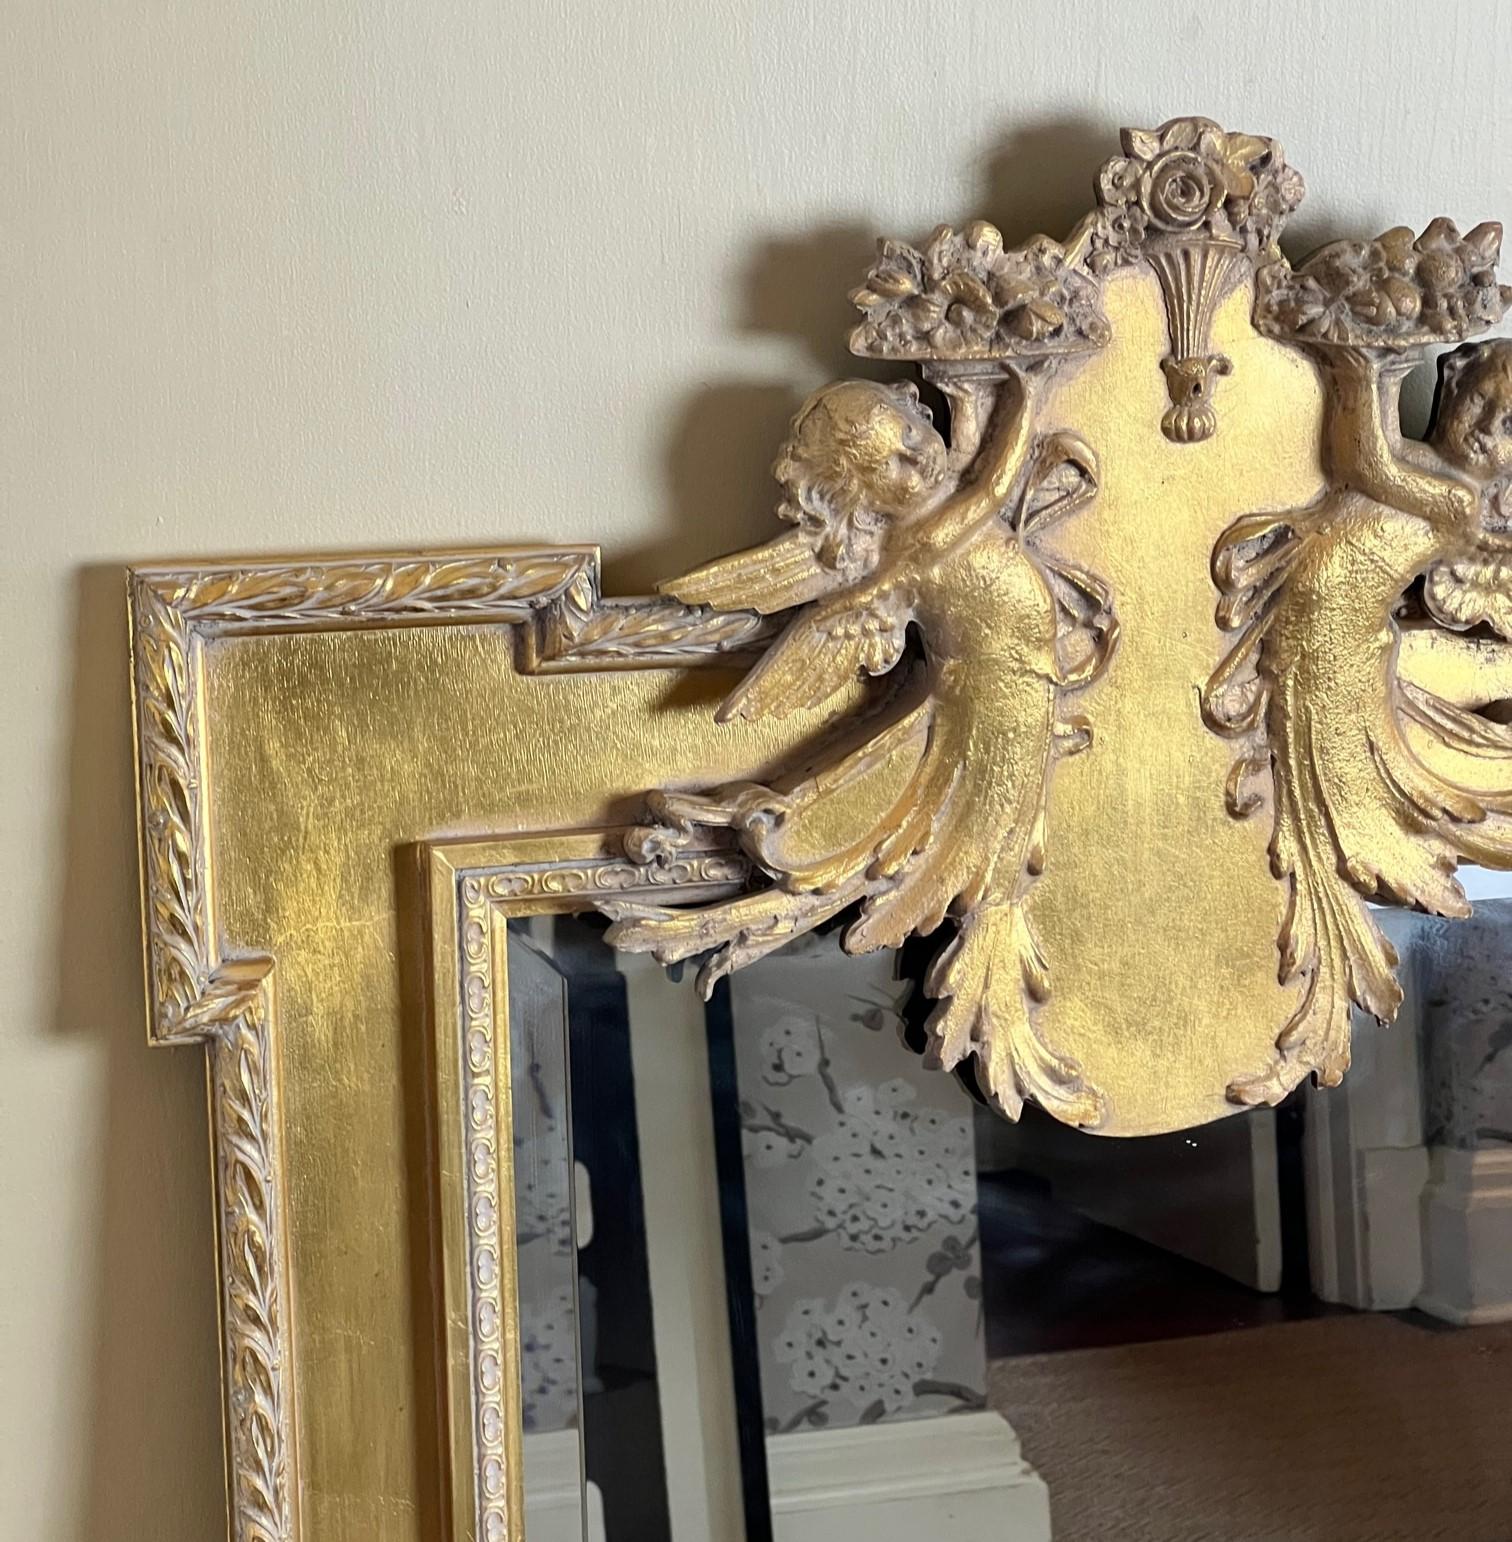 Late 20th Century 20th C. Neoclassical Style Giltwood Mirror with Cherub and Floral Decoration For Sale